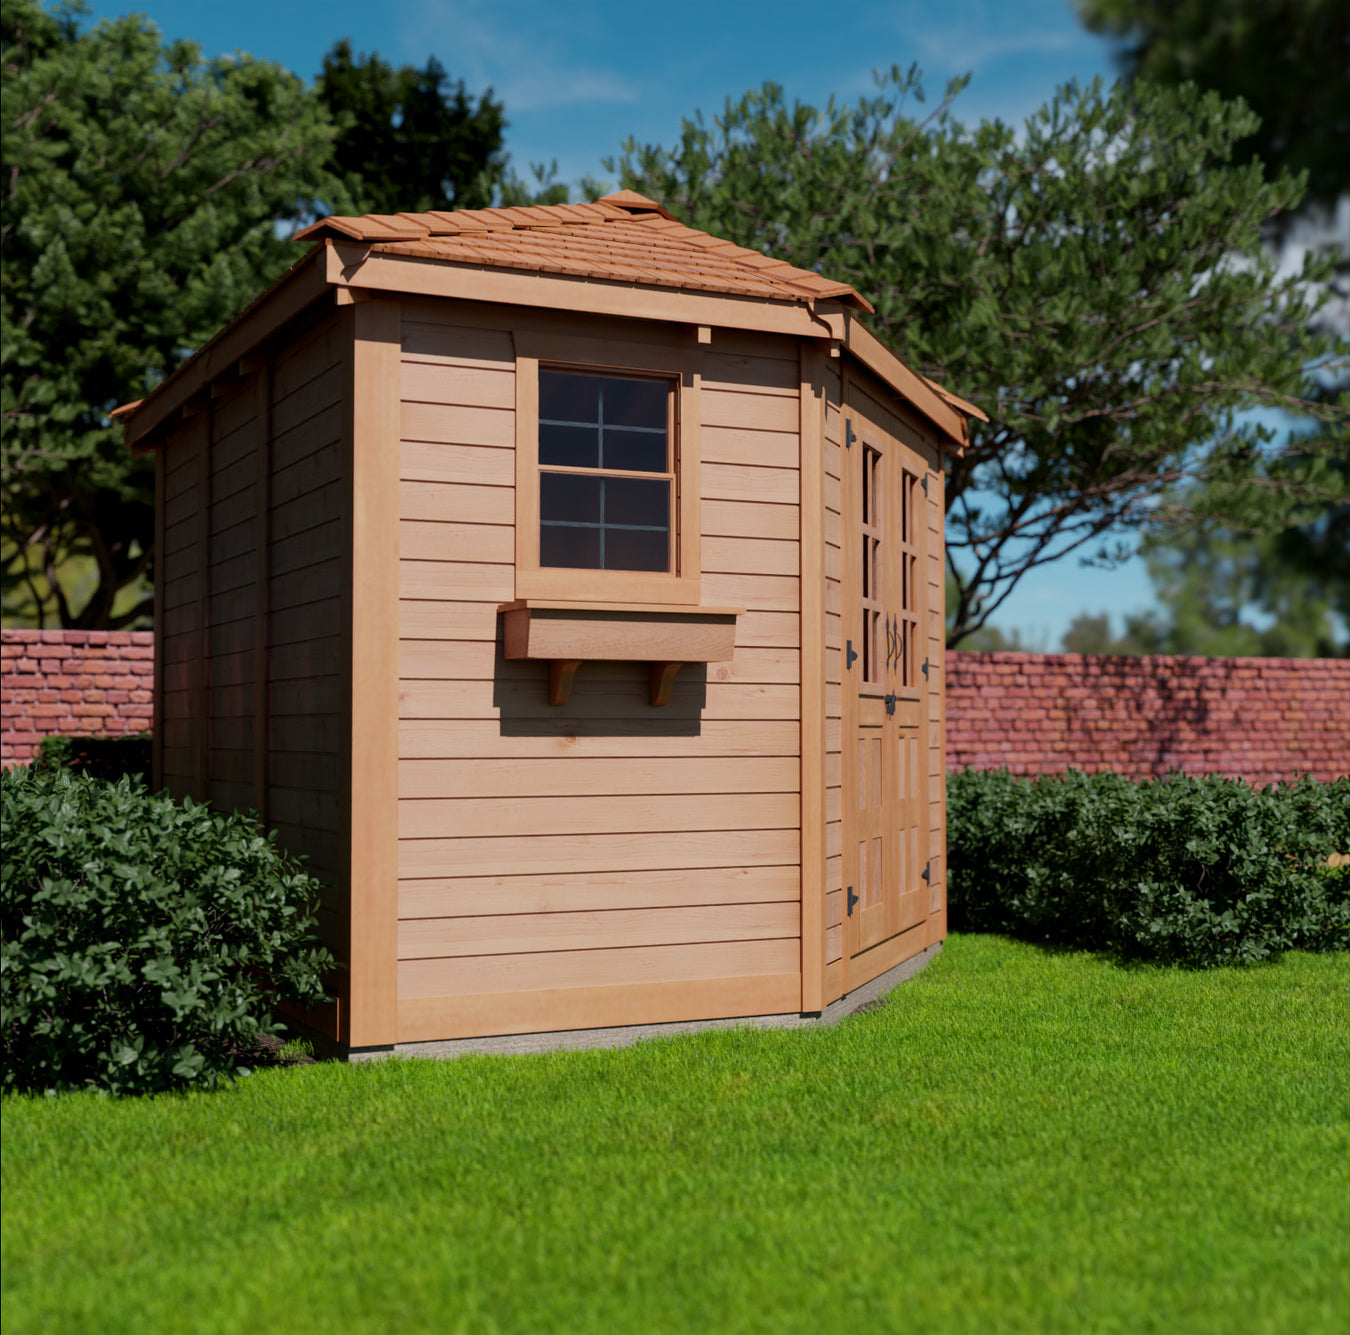  A wooden 9x9 Outdoor Penthouse Garden Shed with double doors, situated on a grassy lawn, under a clear sky.